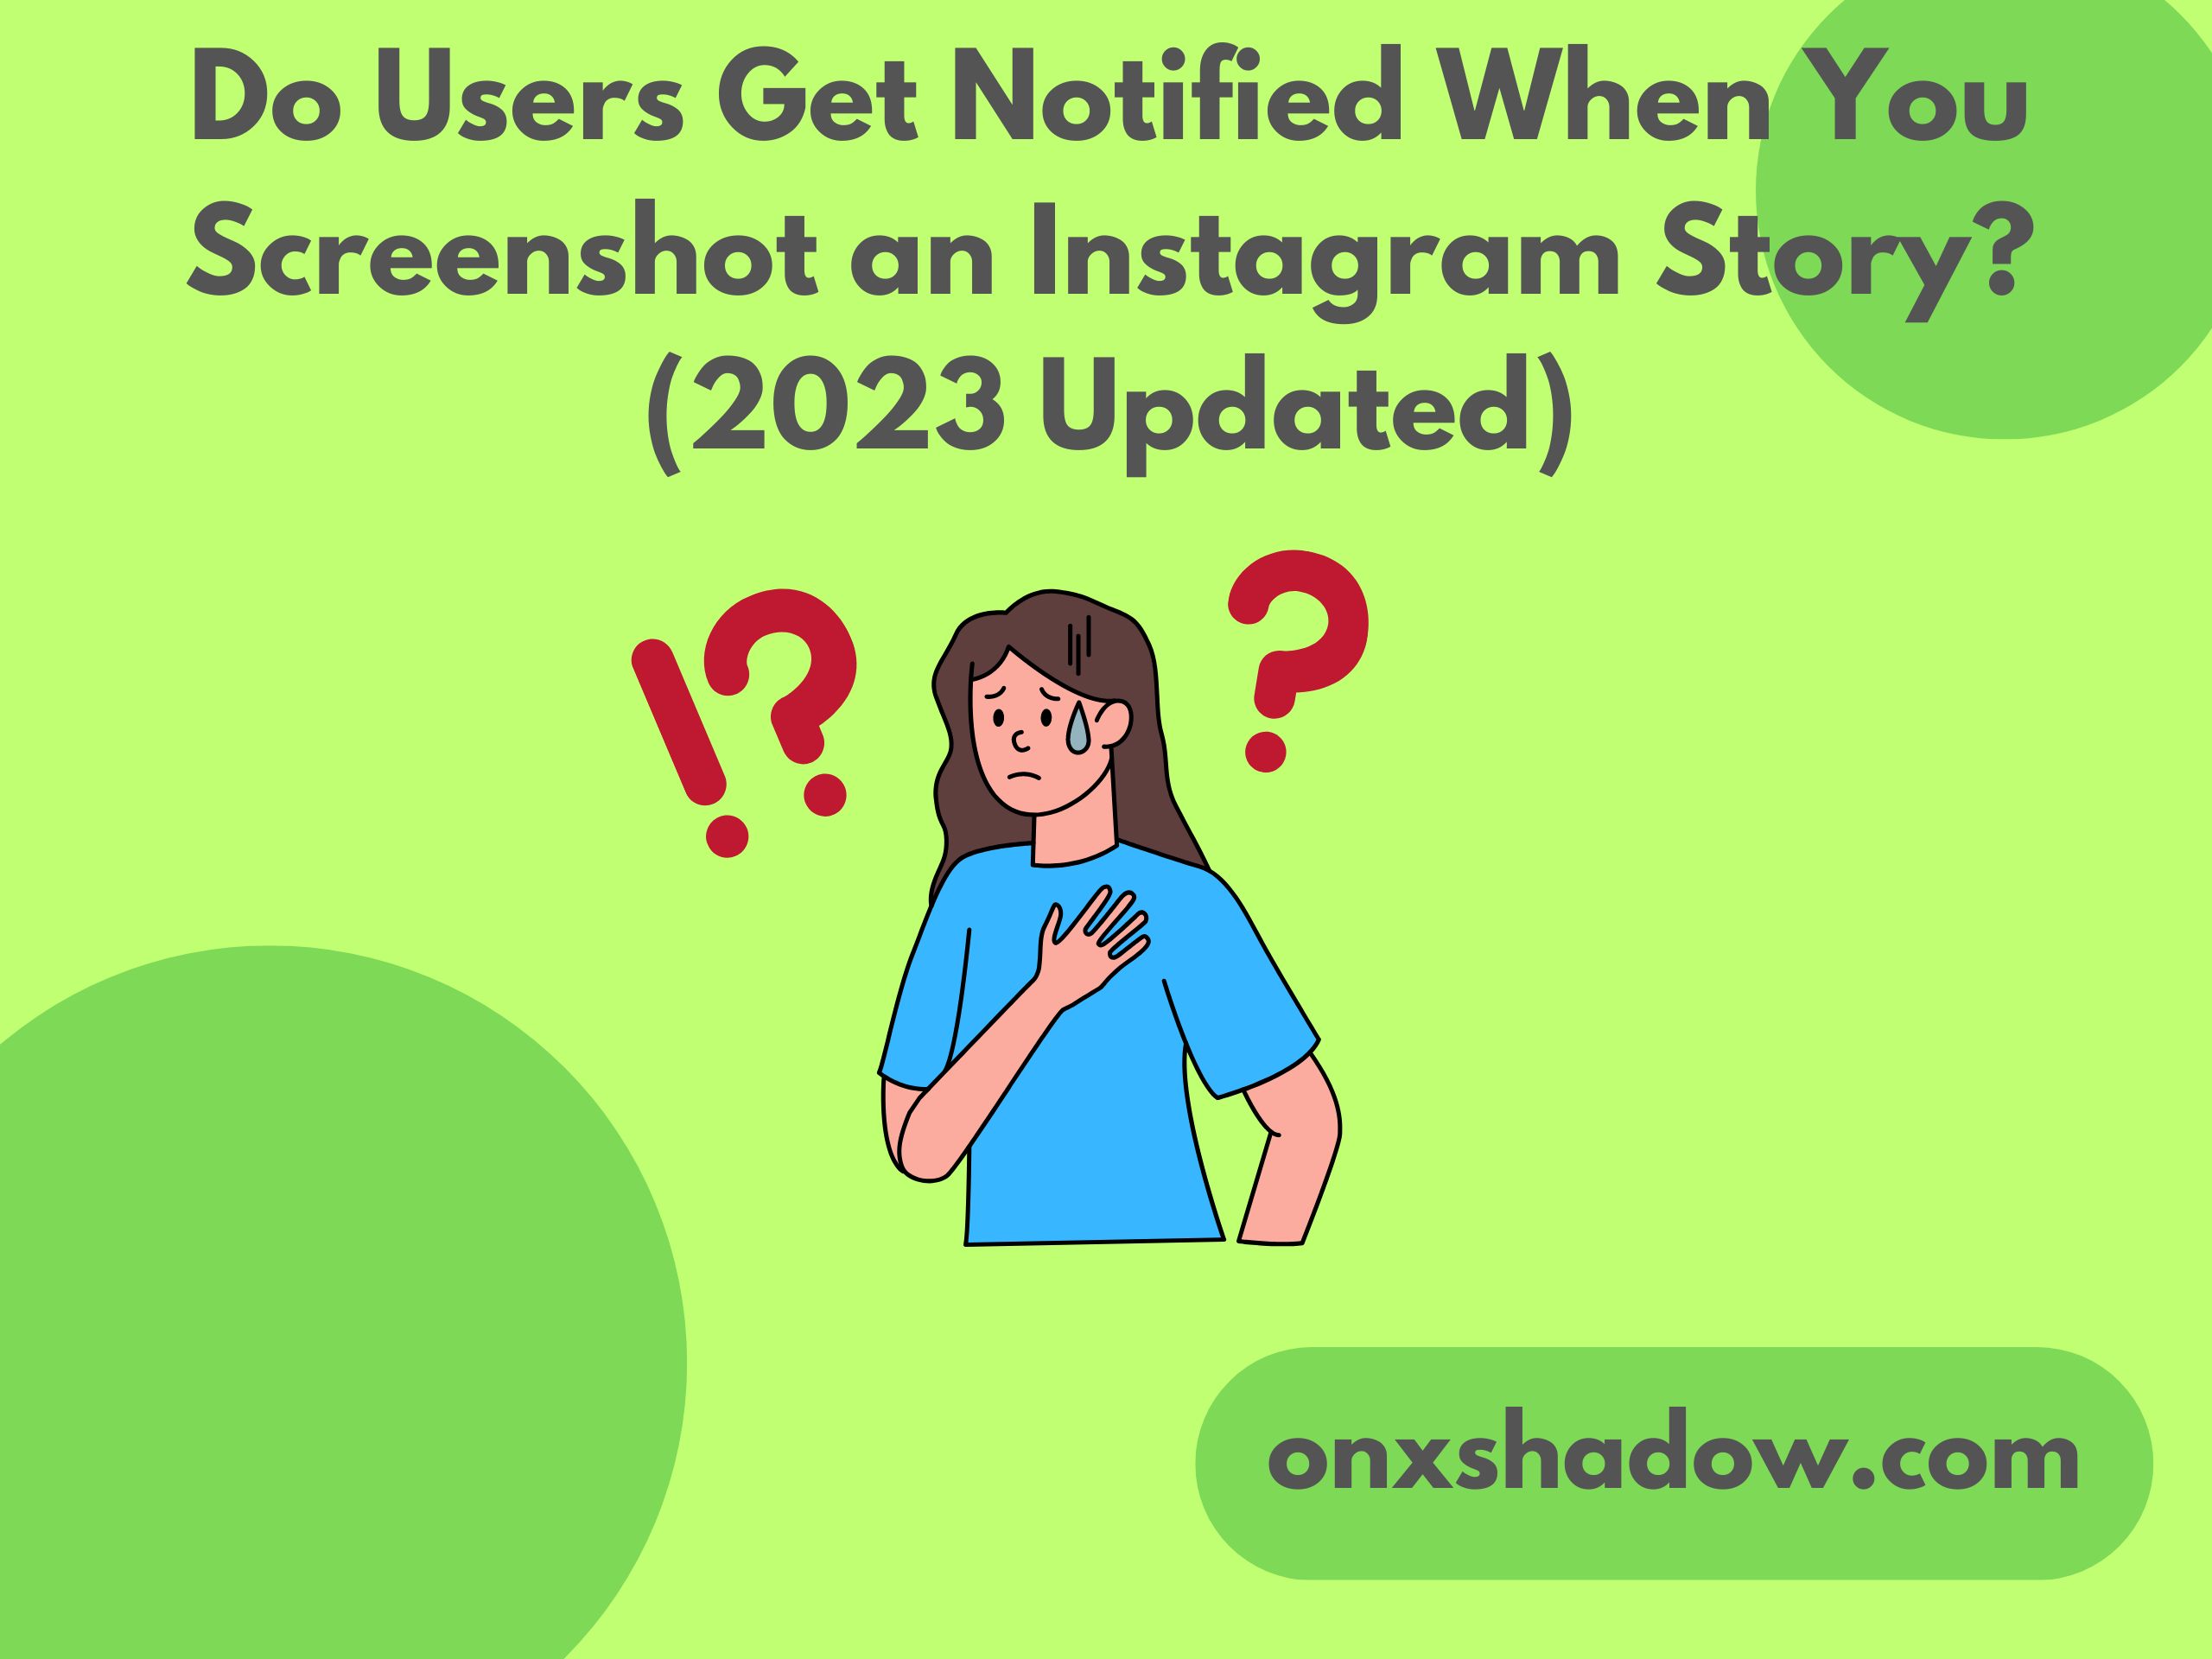 Do Users Get Notified When You Screenshot an Instagram Story? (2023 Updated)